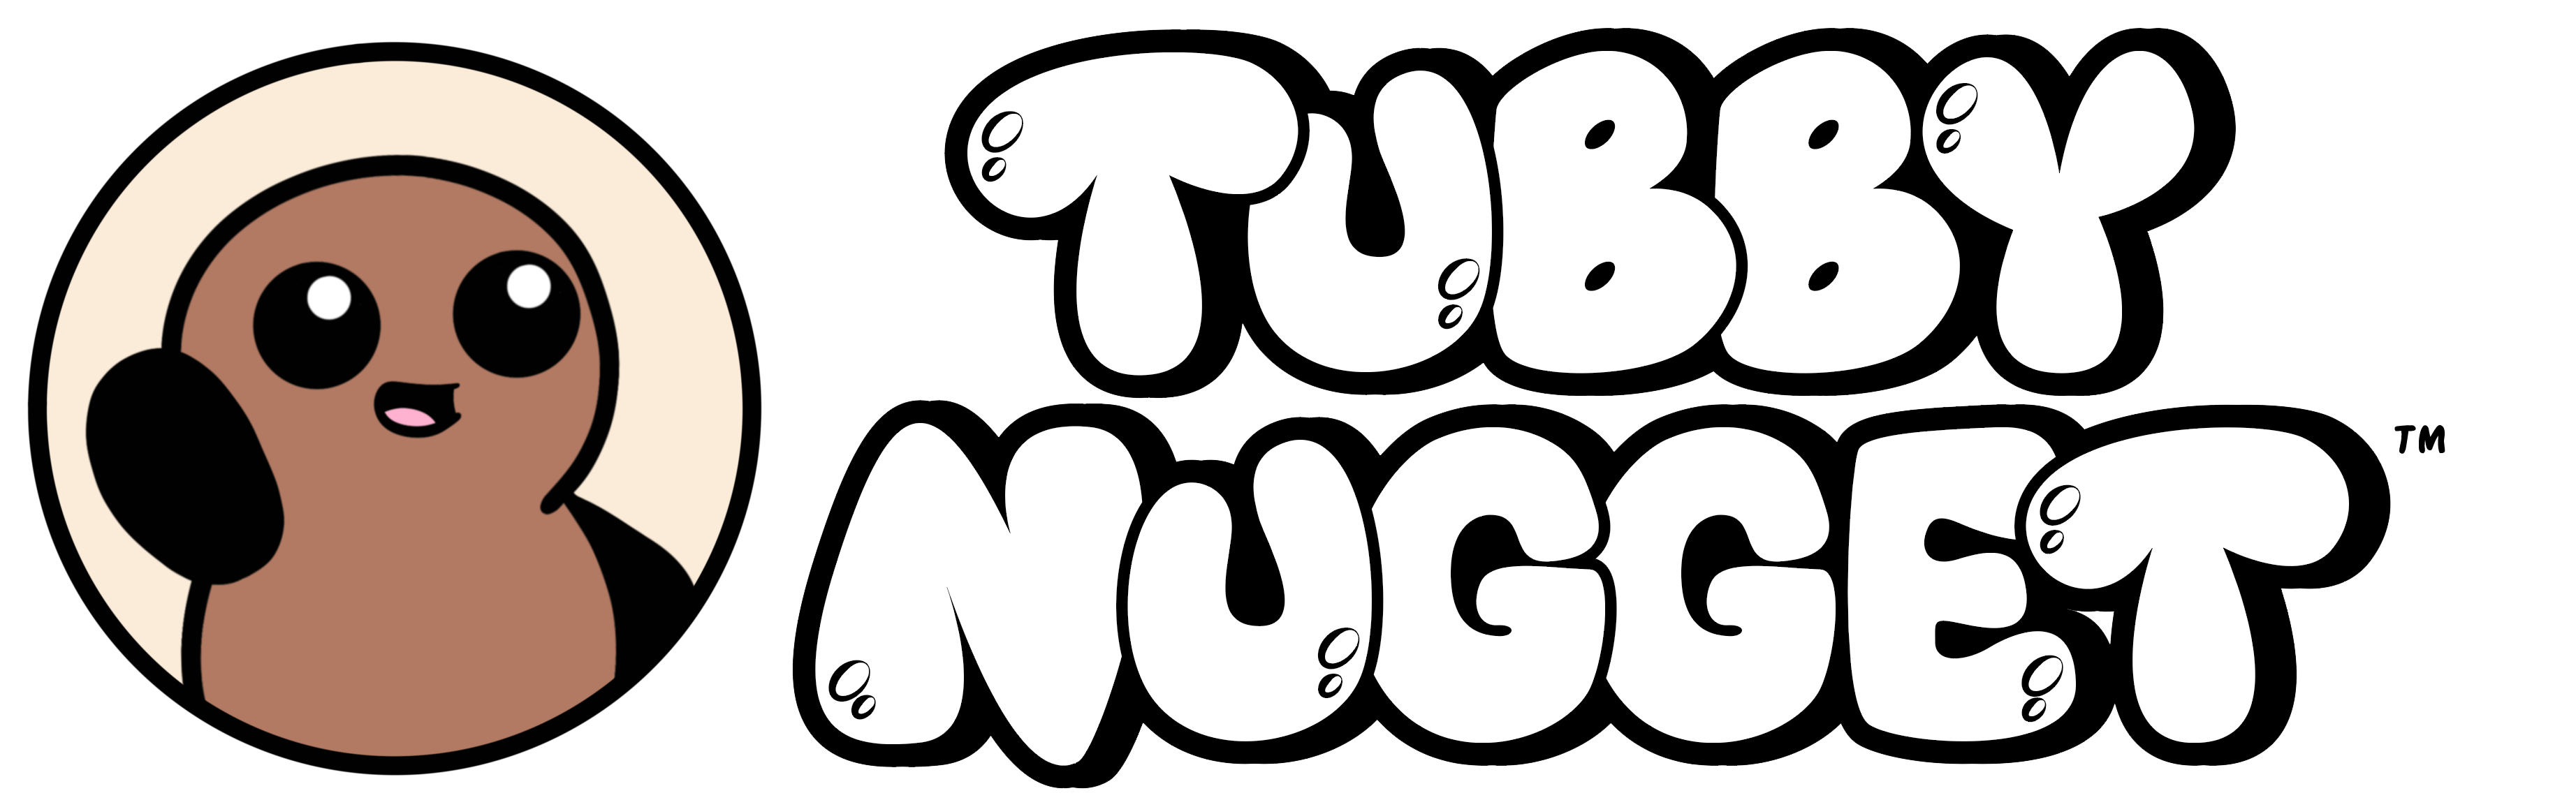 Sudan Comwww Ketosex - Tubby Nugget Official Merch Store